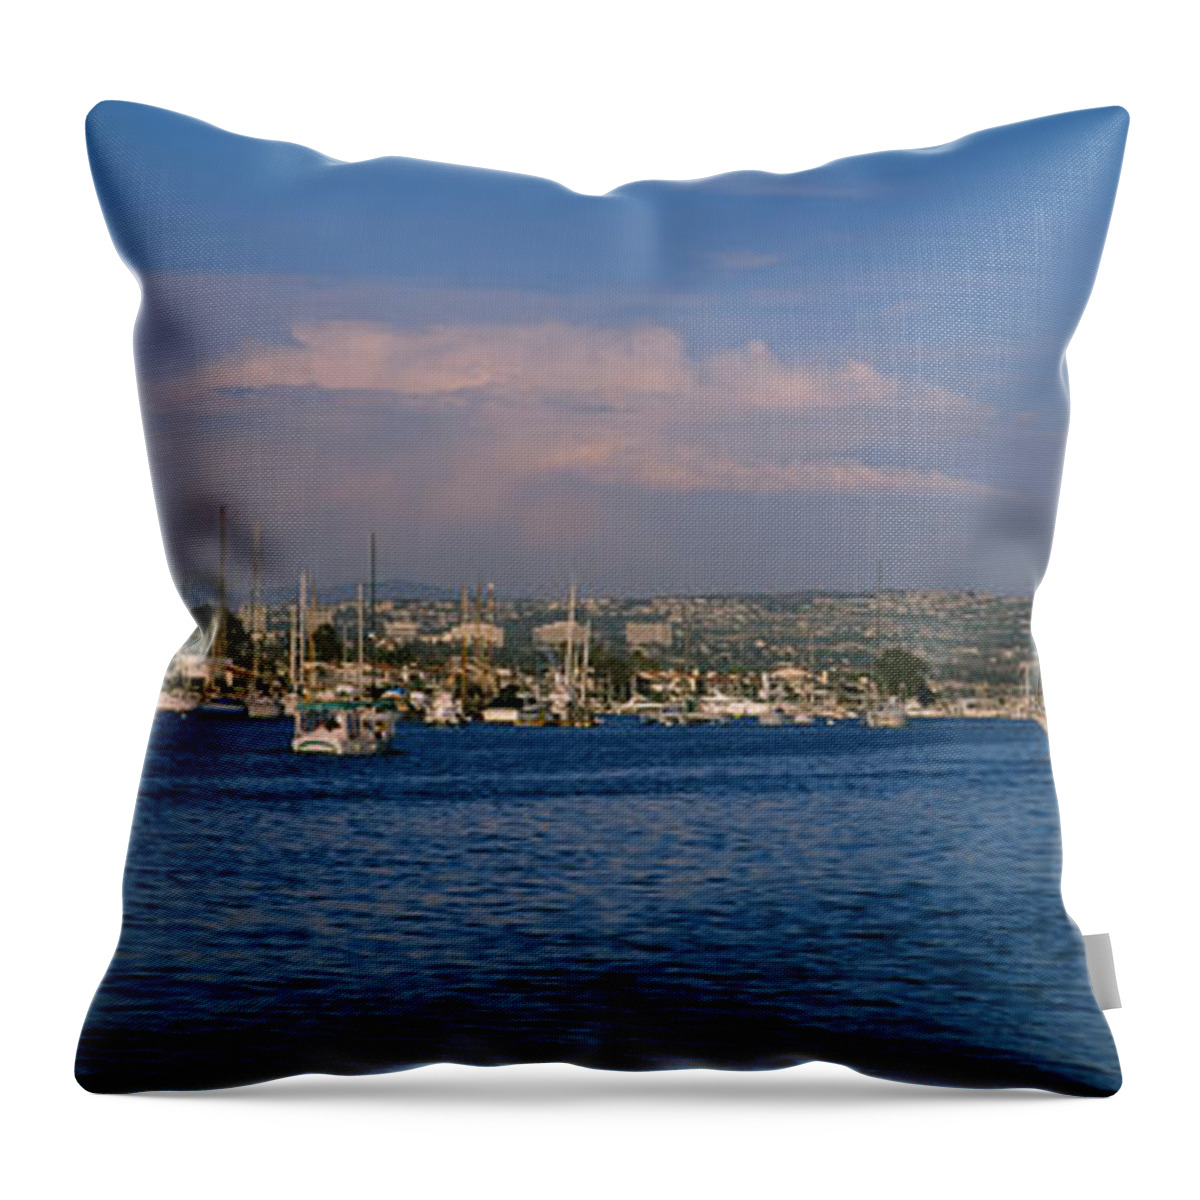 Photography Throw Pillow featuring the photograph Boats At A Harbor, Newport Beach by Panoramic Images